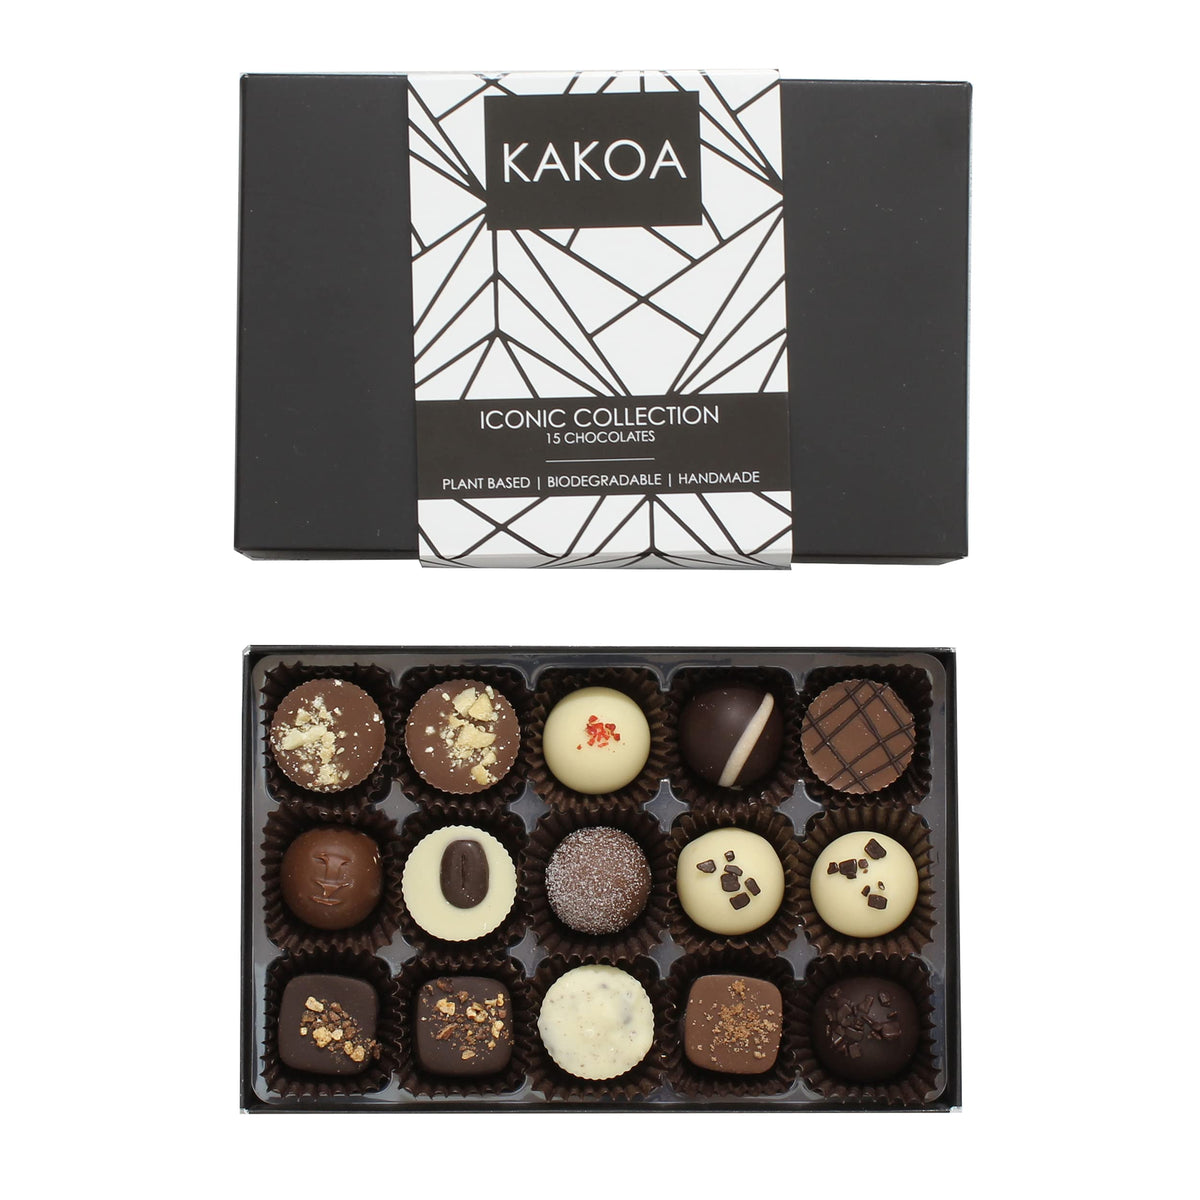 Kakoa Iconic Vegan Chocolate Selection Box - 15 Chocs | Brownie, Coffee, Caramel, Liqueur | Plant Based Luxury Chocolates For Special Occasions | Gifts for Vegans, Vegetarian, Dairy Free Diets